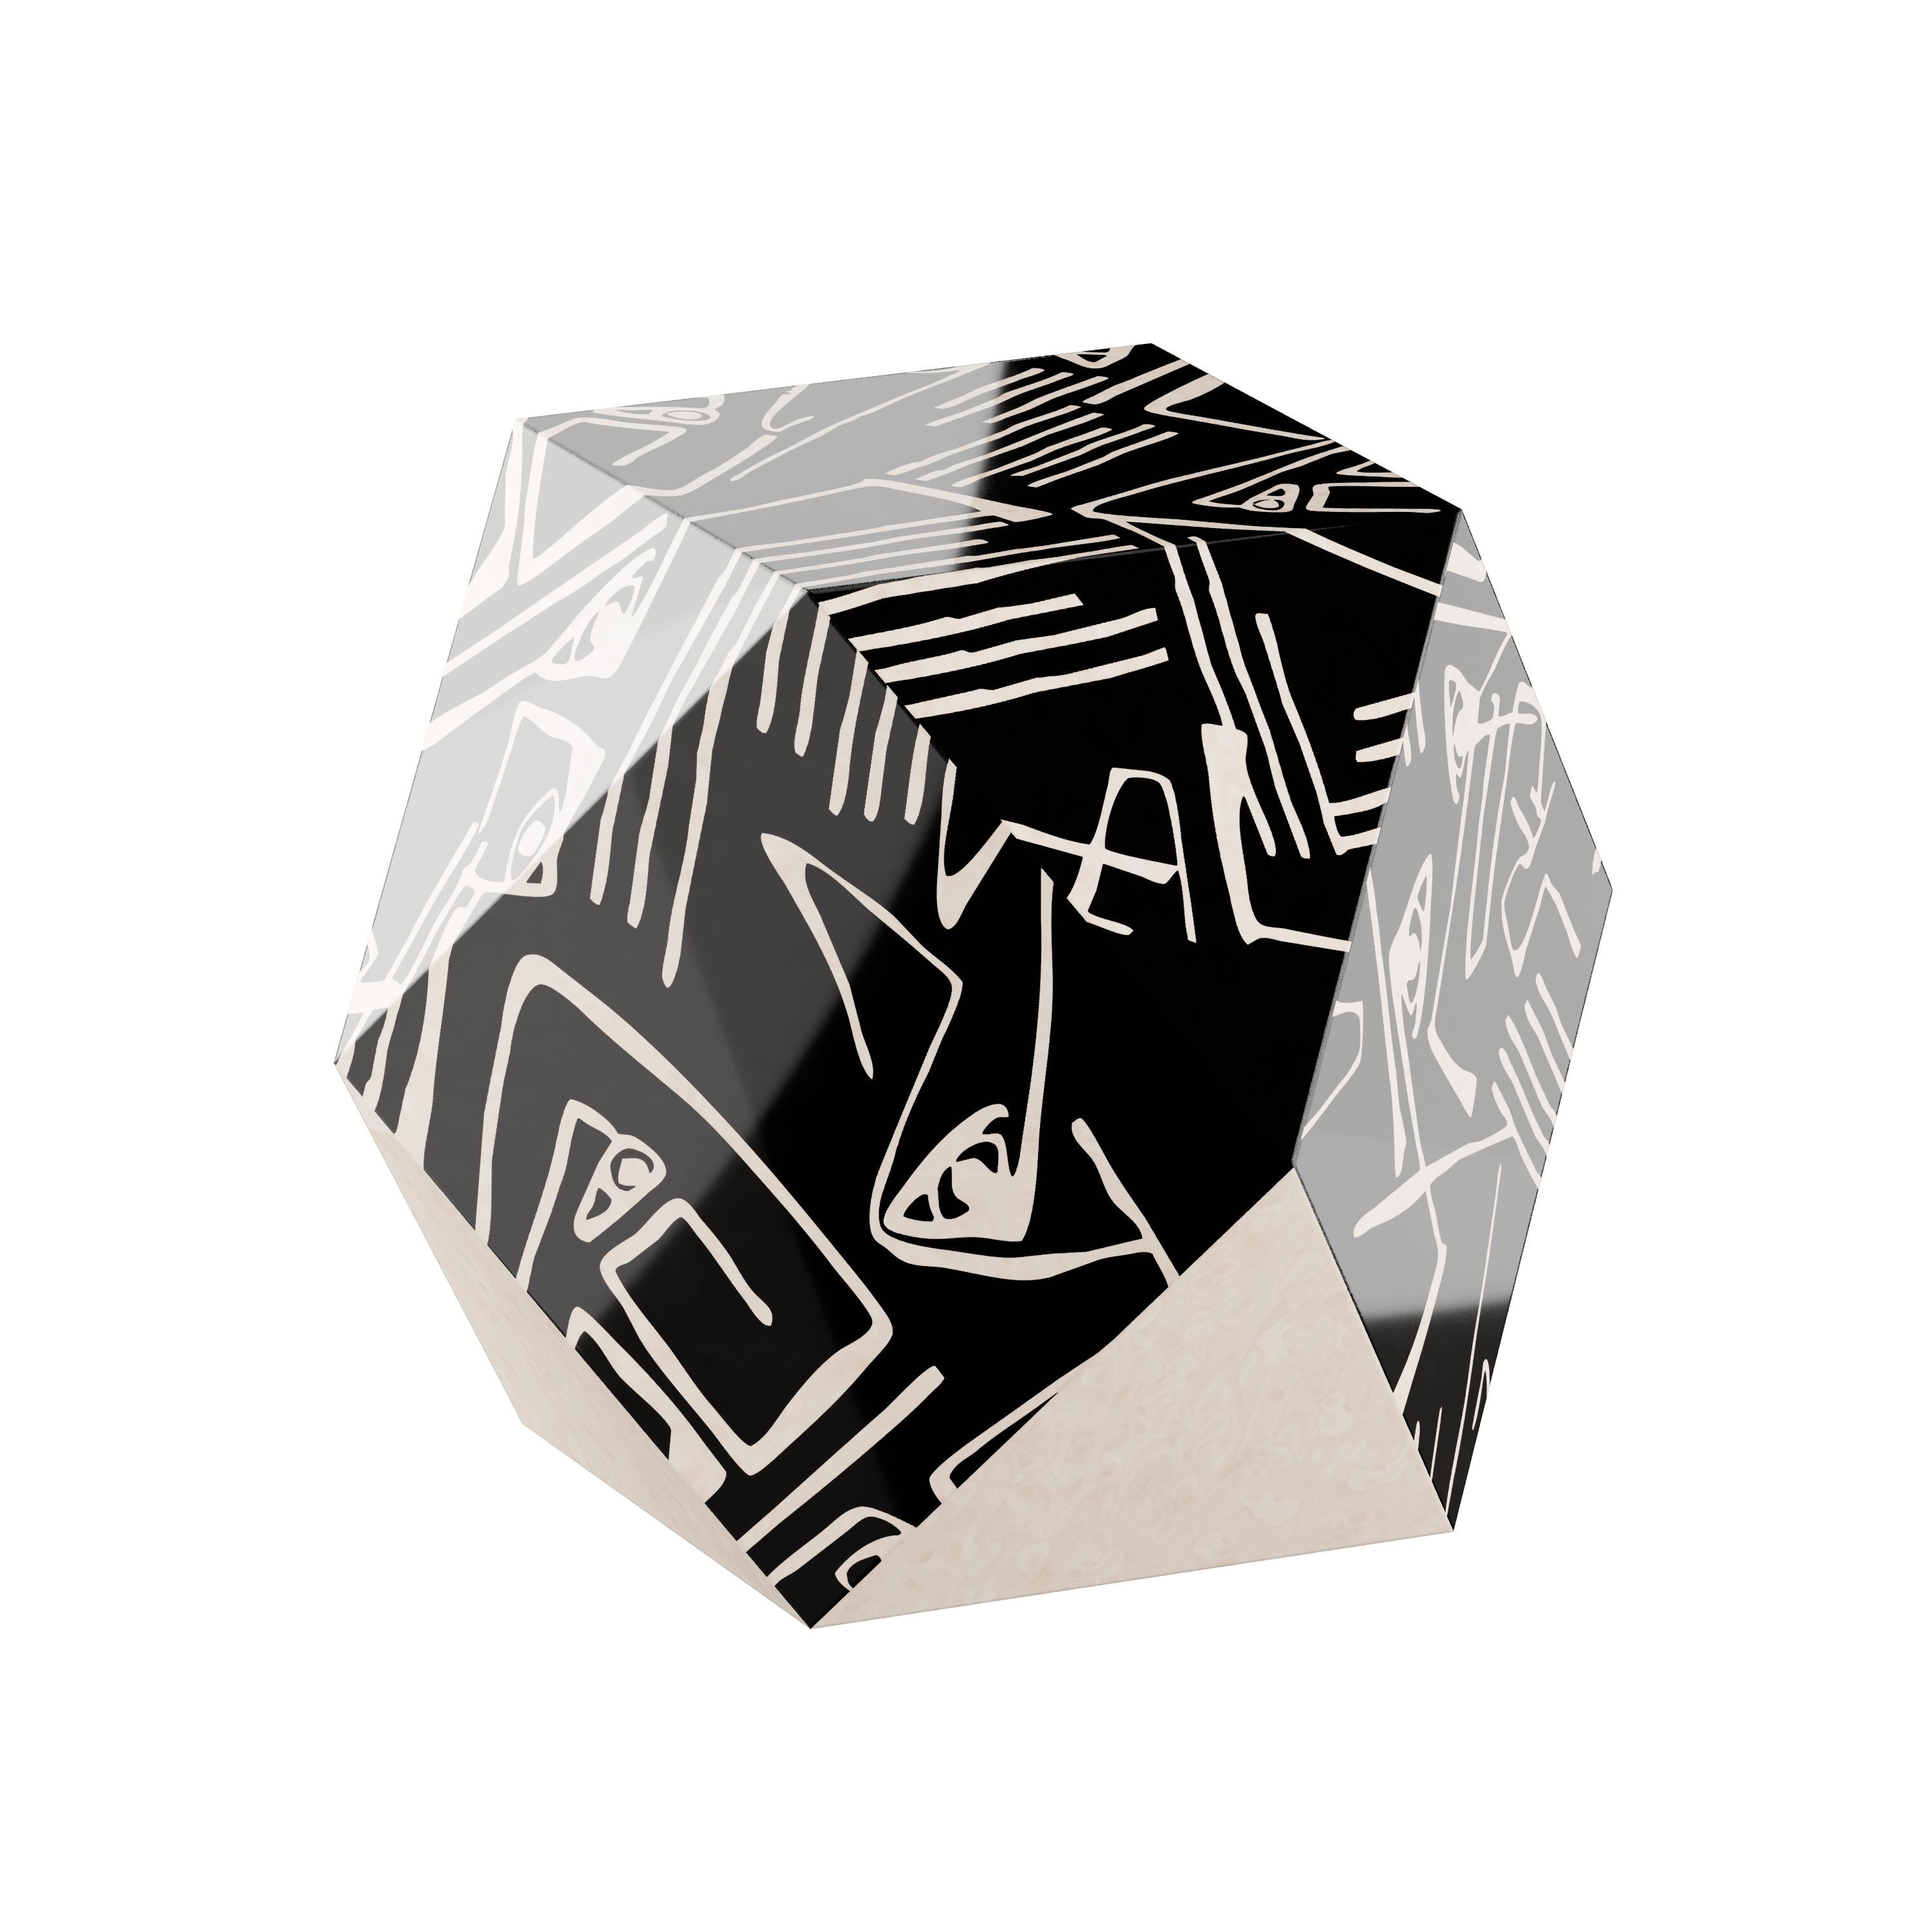 Moderne Table d'appoint The Moderns Cubic Shape Abstract Pattern Black & White Wood Marquetry en vente